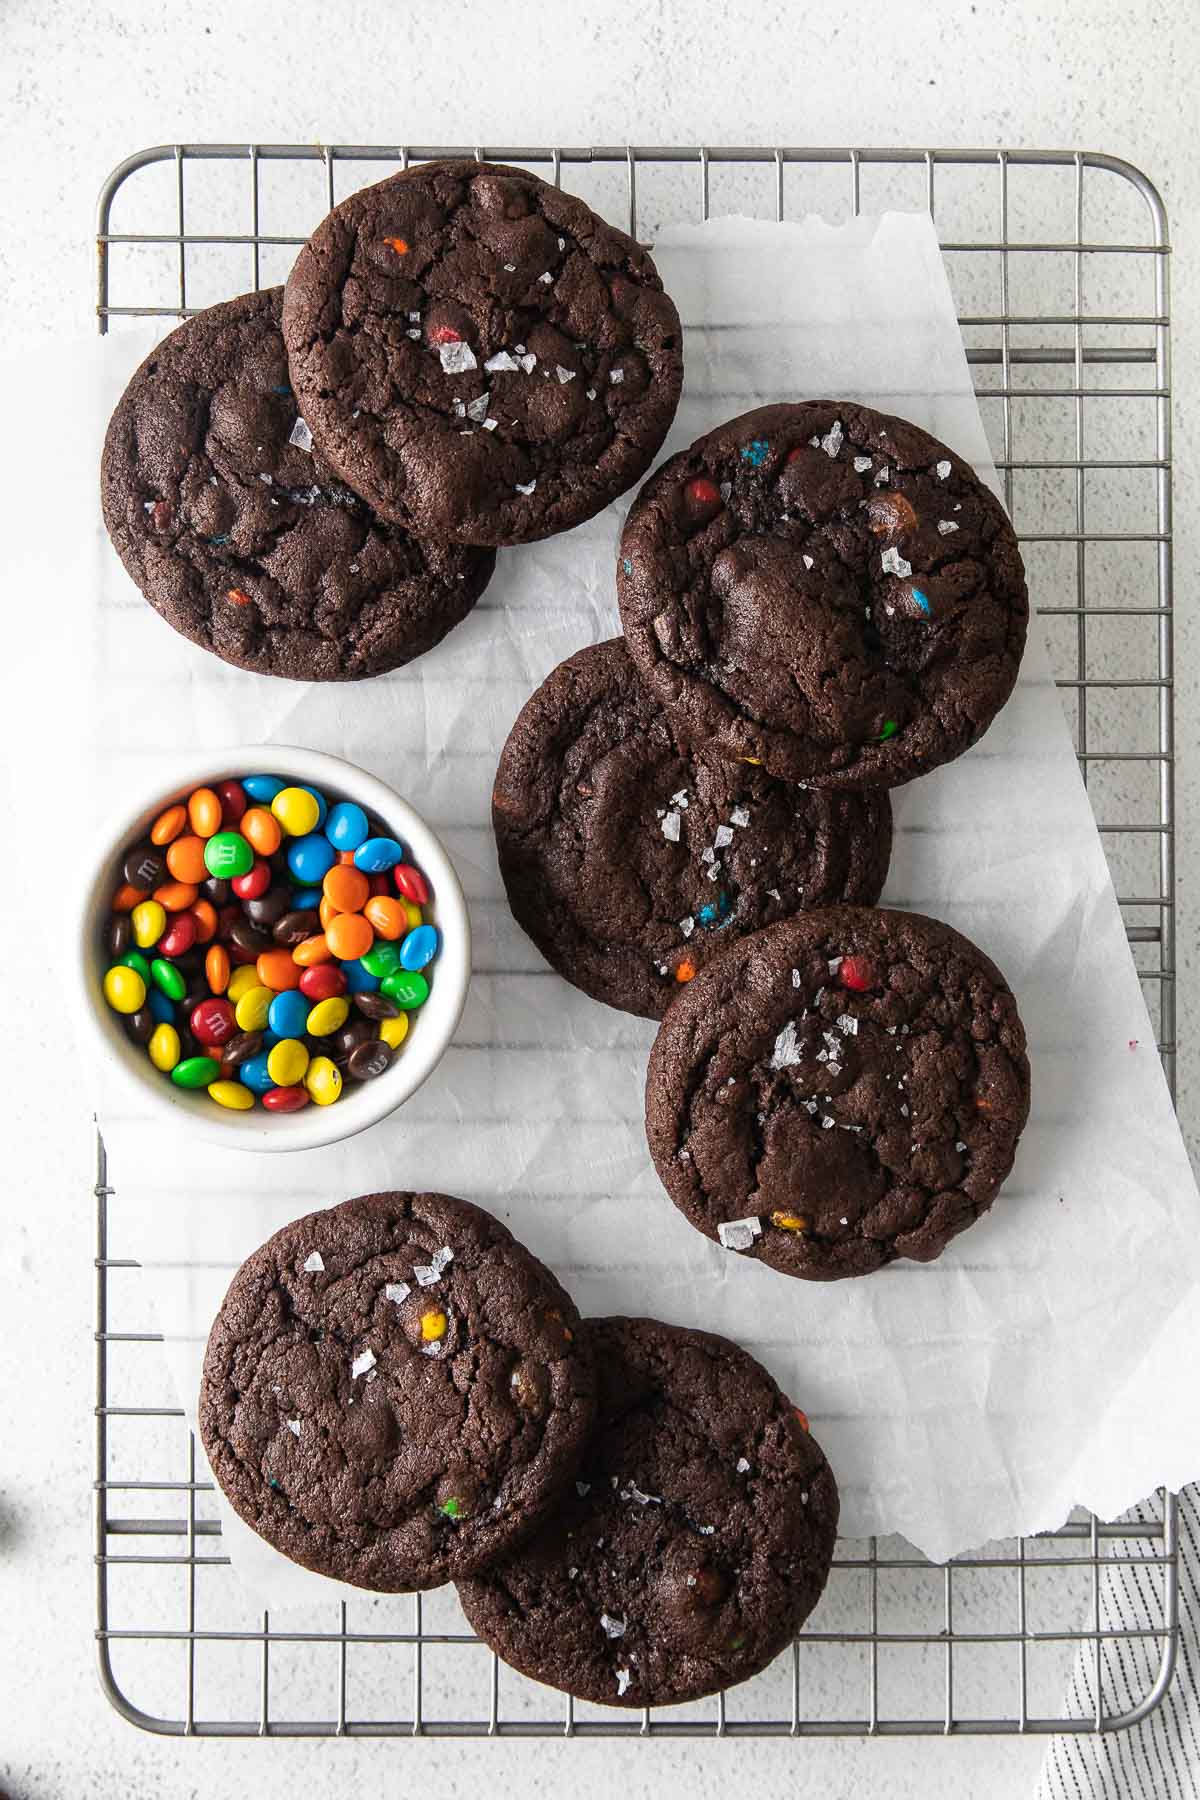 seven double chocolate chip cookies with m&m's on a wire rack with a small bowl of m&m's